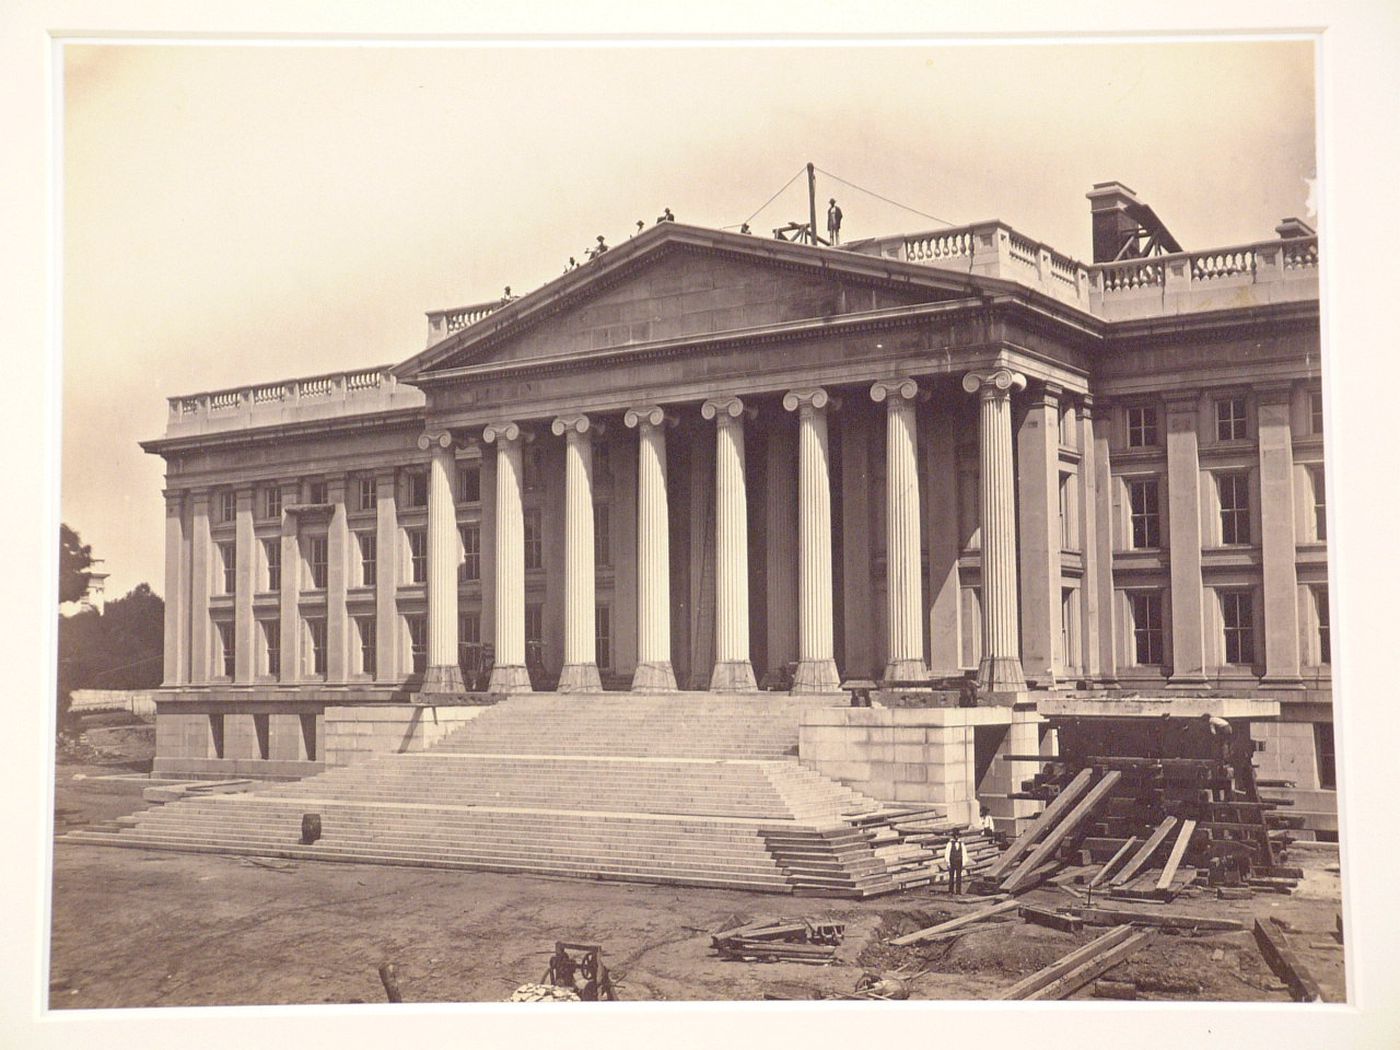 Treasury Building under contruction: Workmen on roof and on ground level, right side, Washington, District of Columbia